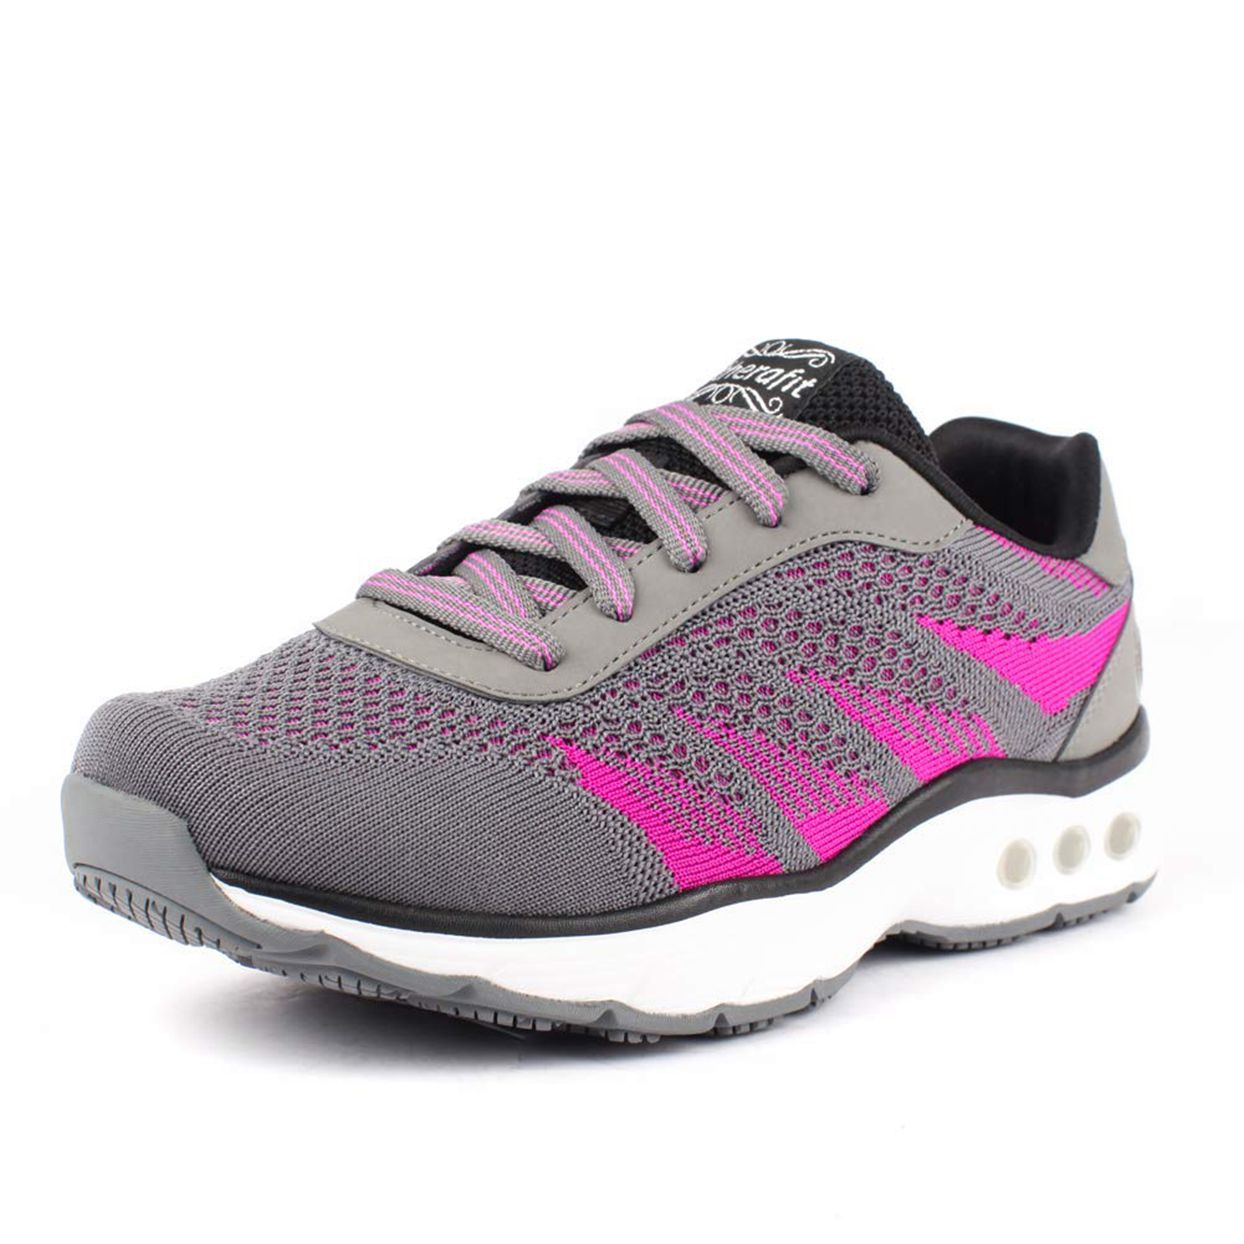 Whippet Pink White Print Running Shoes for Women-Casual Comfortable Sneakers Running Shoes